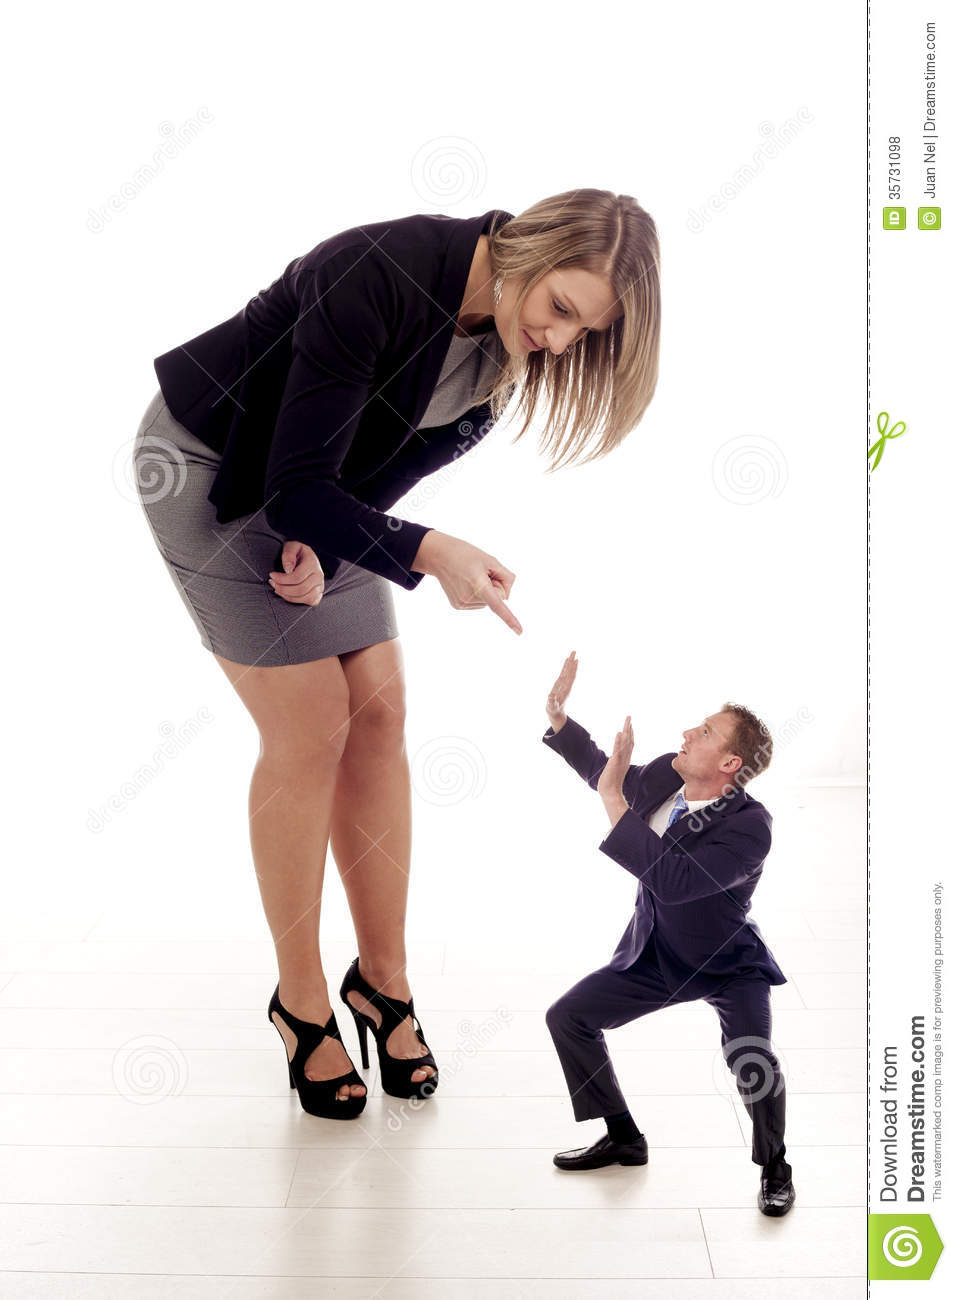 Bullying In The Workplace  Royalty Free Stock Photos   Image  35731098